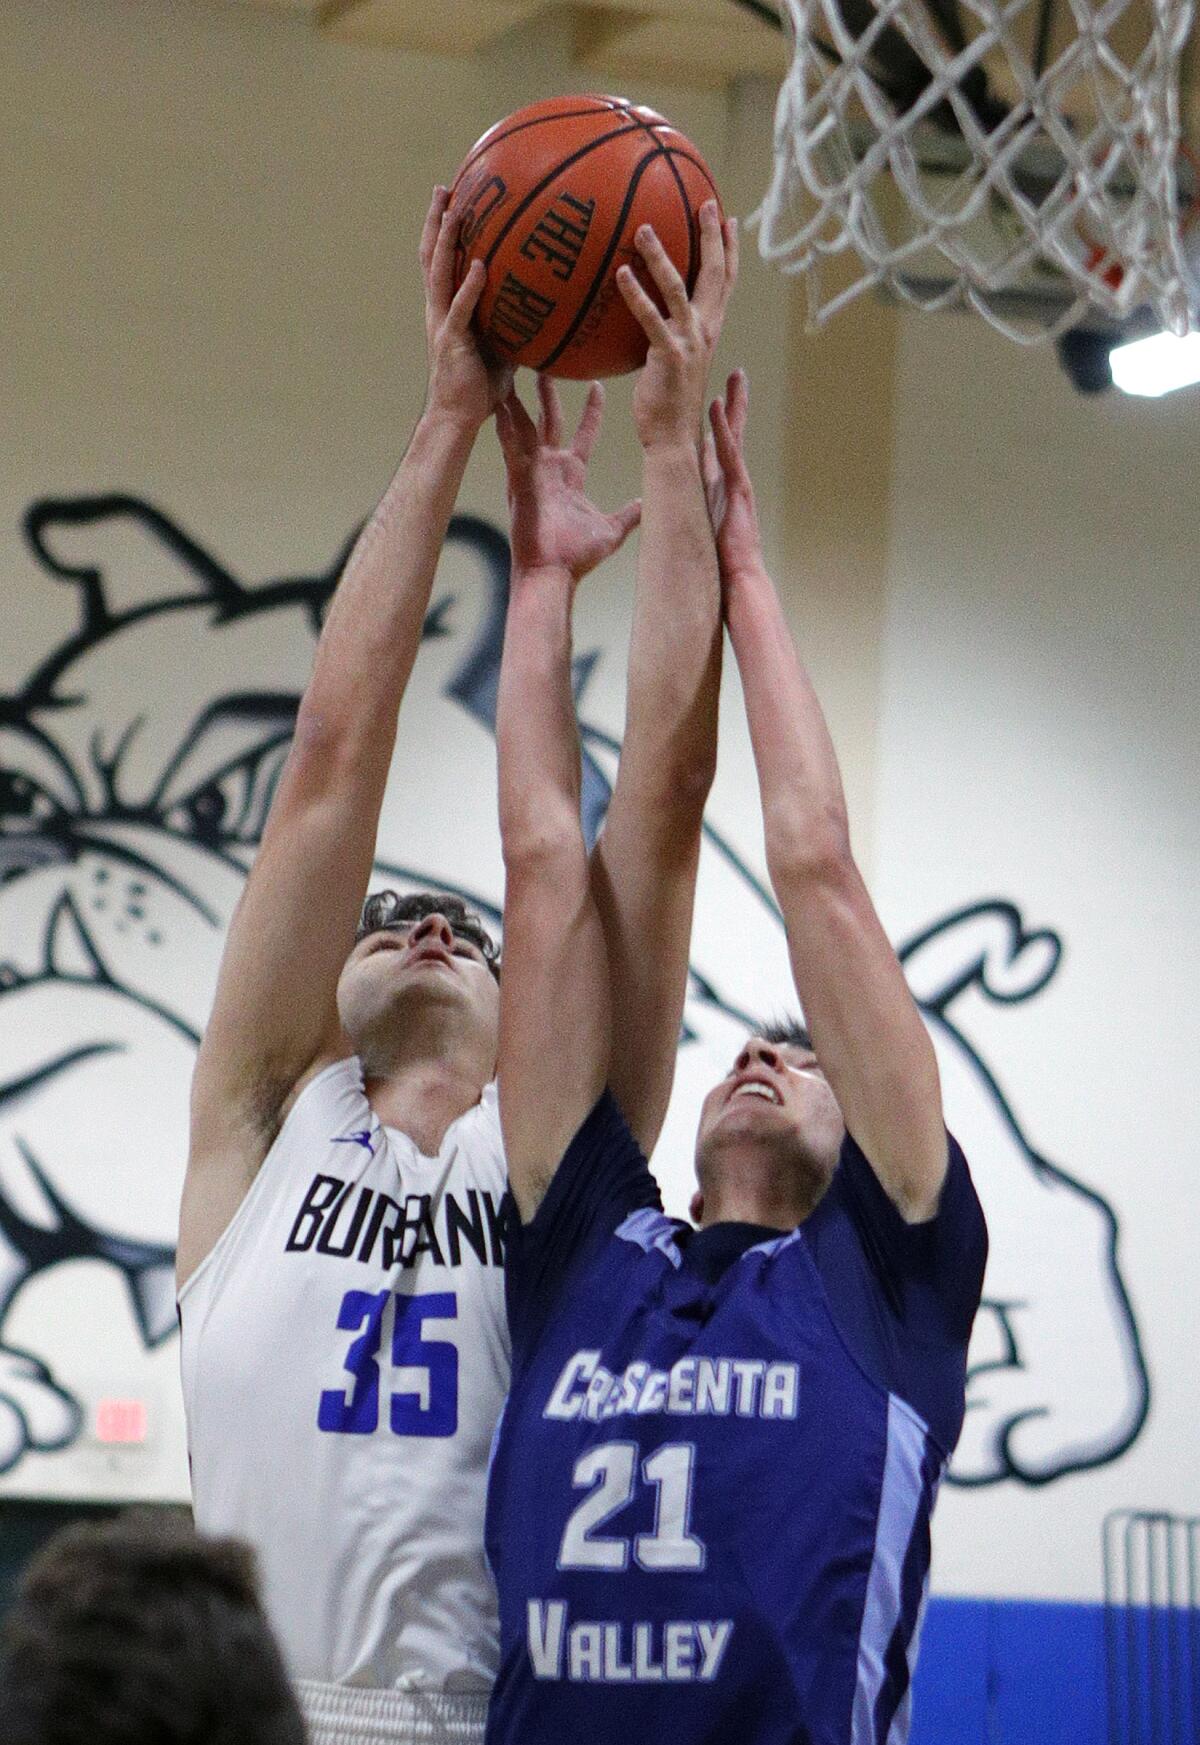 Burbank's Kevin Sarkes and Crescenta Valley's Ryan Raad battle for a rebound in a Pacific League boys' basketball game at Burbank High School on Thursday, December 19, 2019.